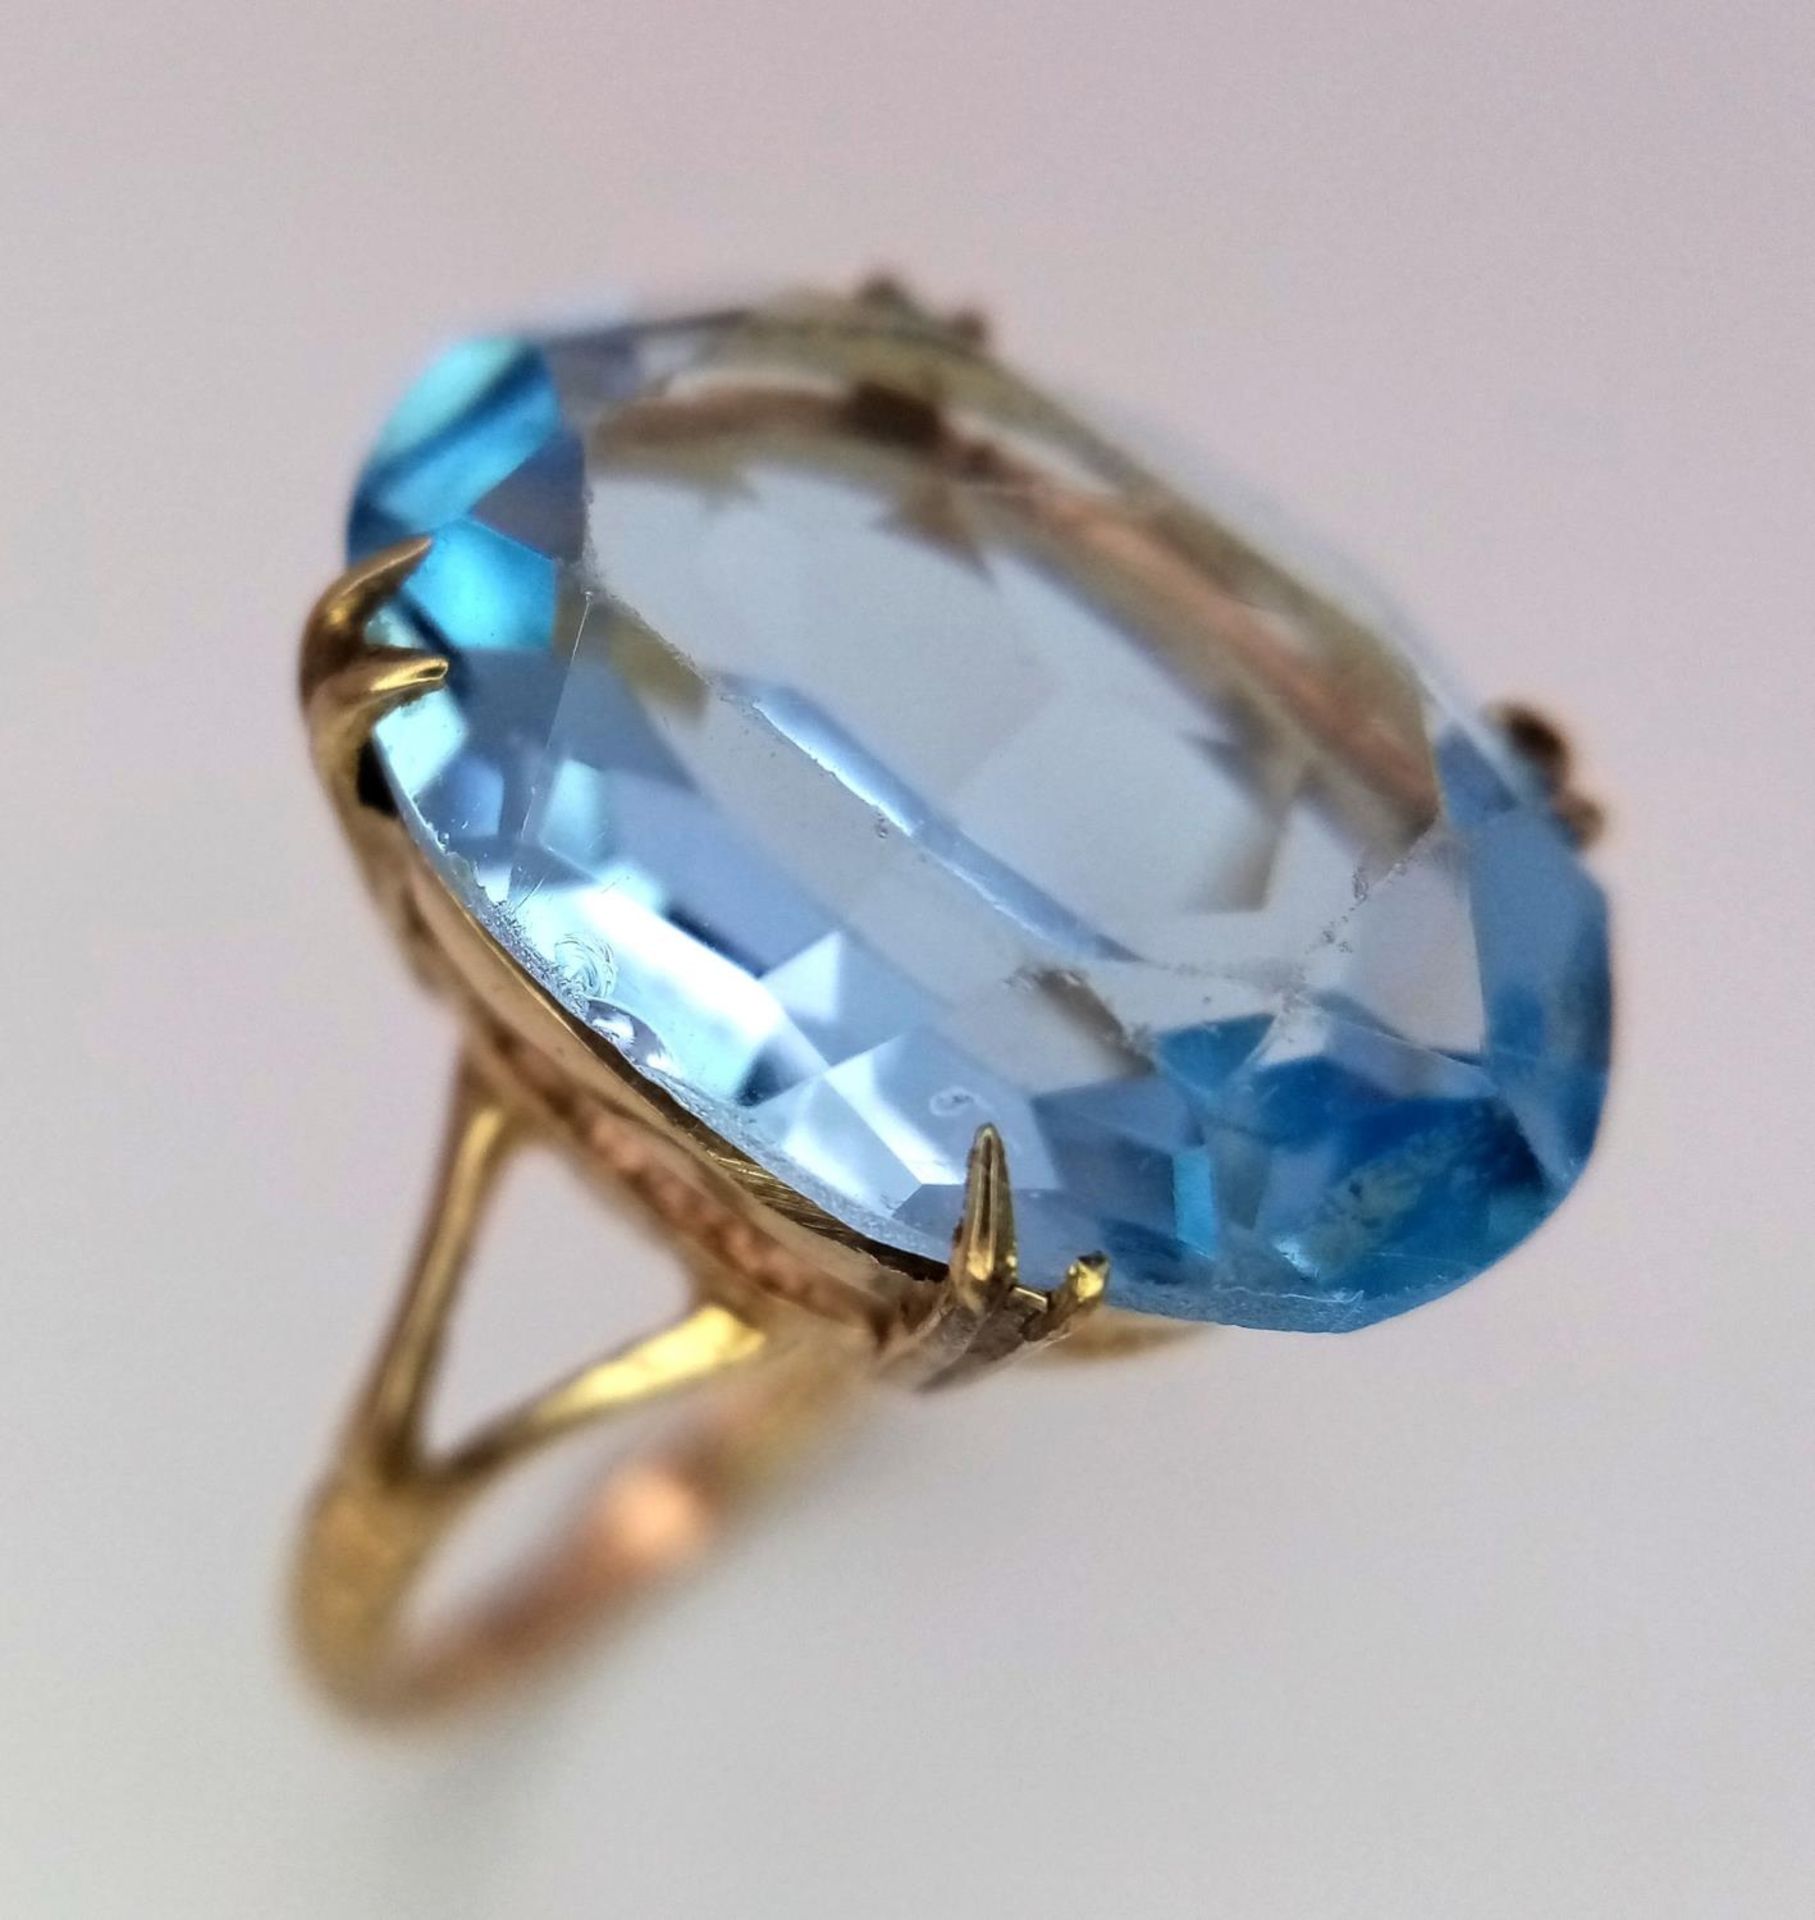 A 9ct Yellow Gold Blue Topaz Ring, 12mmx18mm topaz, size M, 4.1g total weight. ref: 1500I